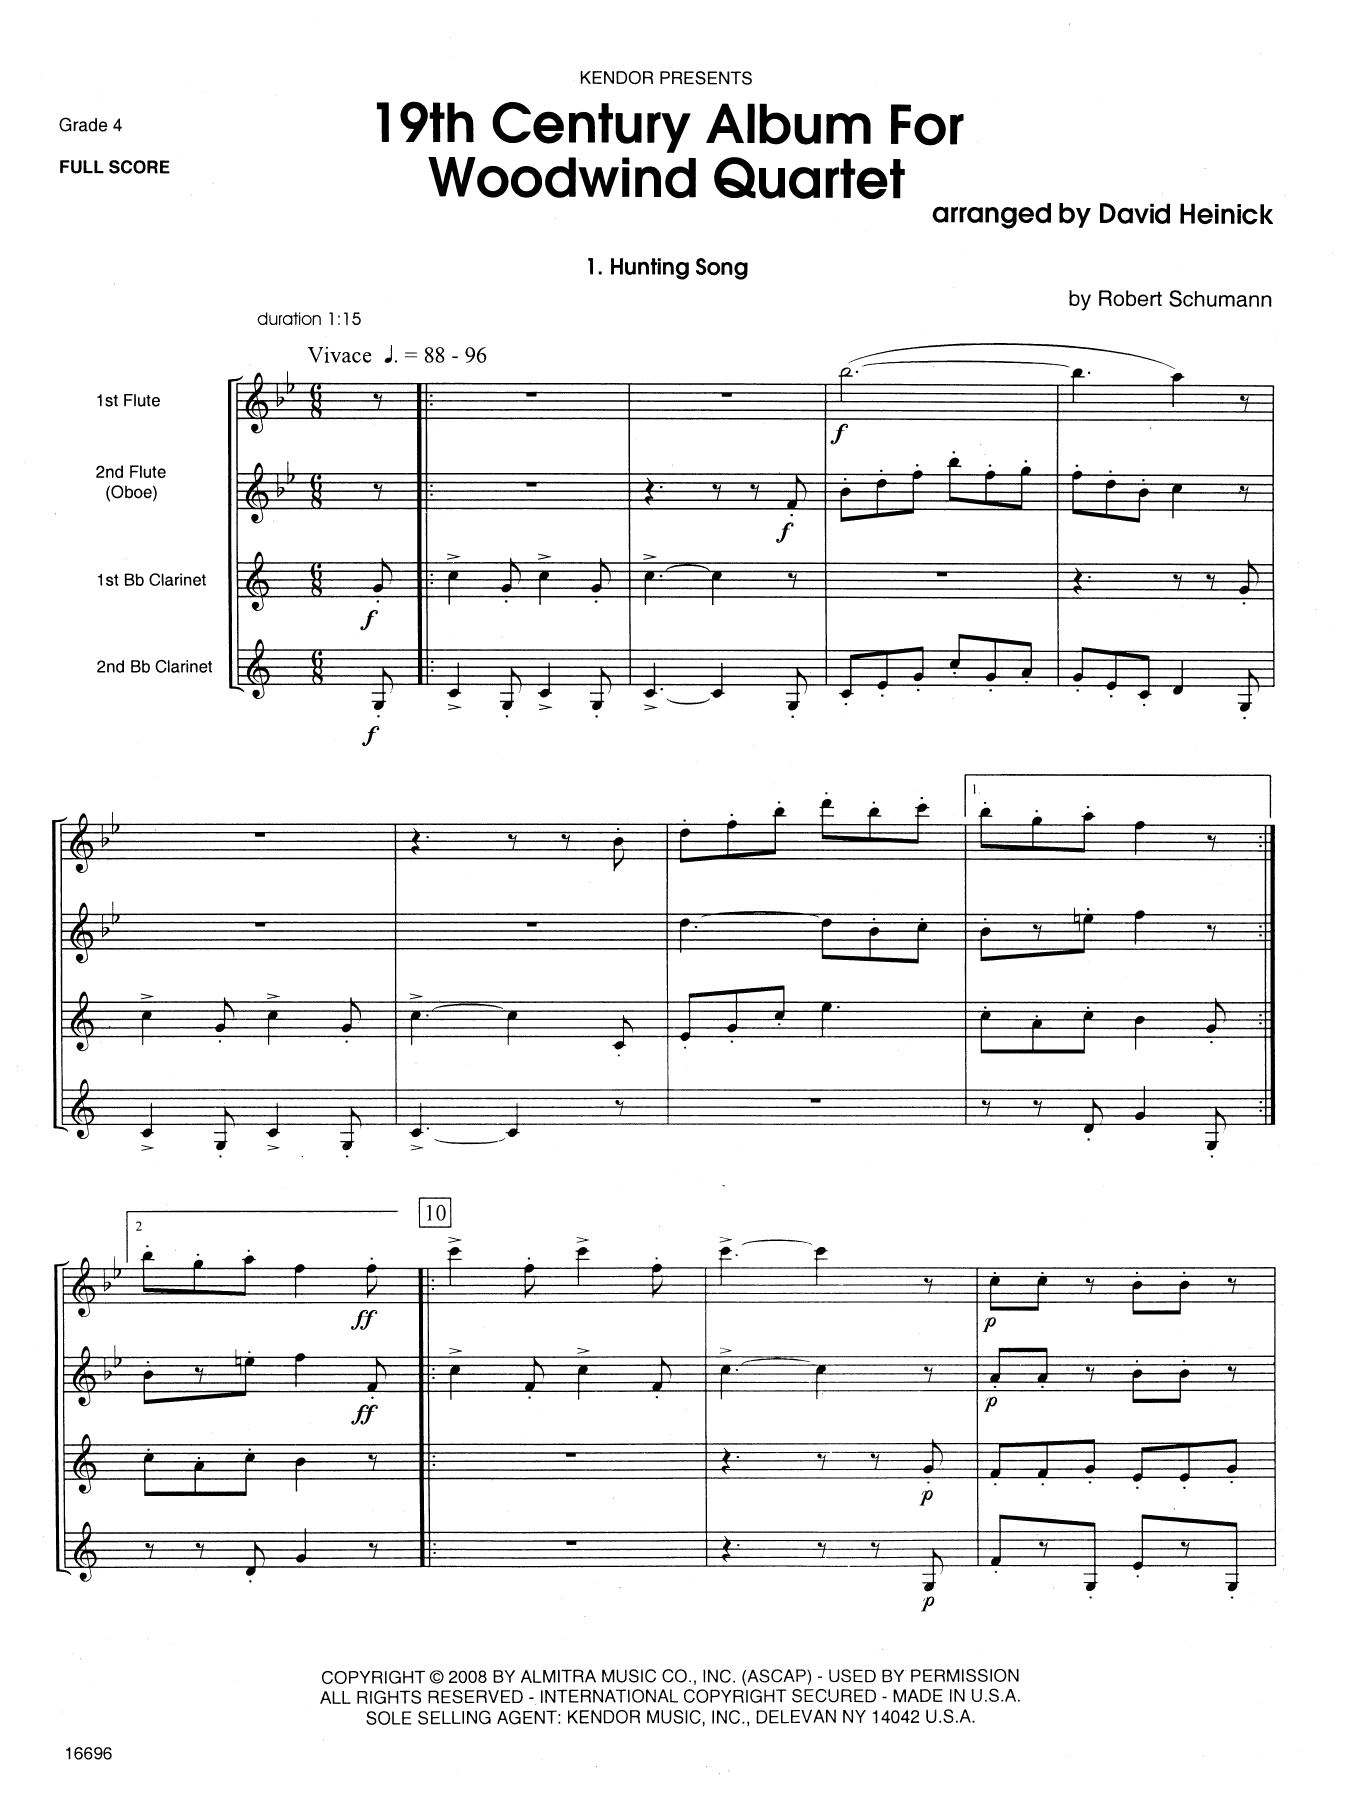 David Heinick 19th Century Album For Woodwind Quartet - Full Score sheet music notes and chords. Download Printable PDF.